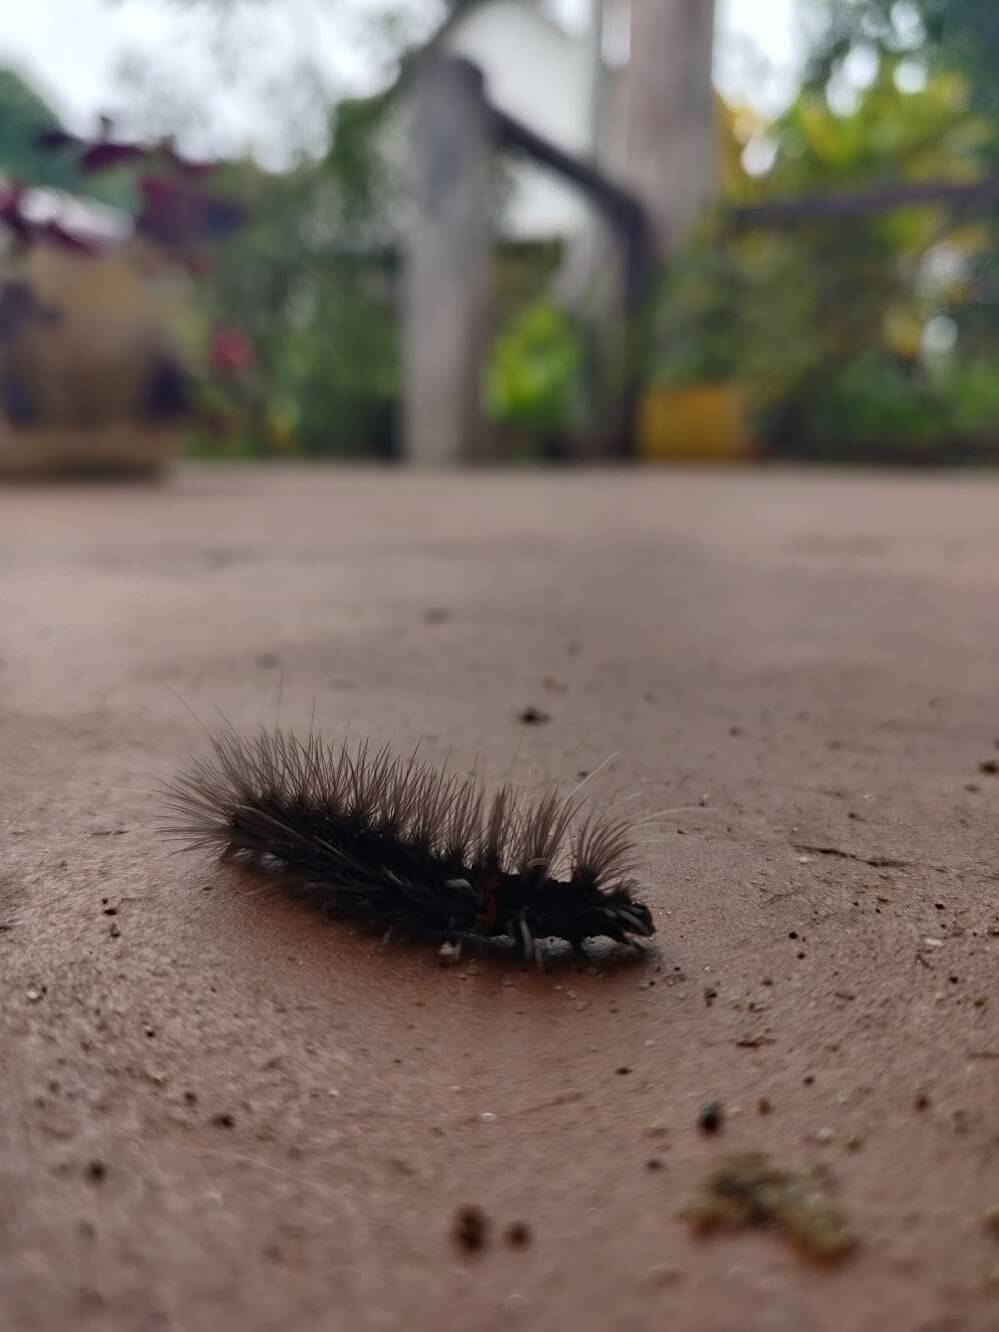 A close-up of a rather prickly caterpillar scurrying along the floor outside the classroom